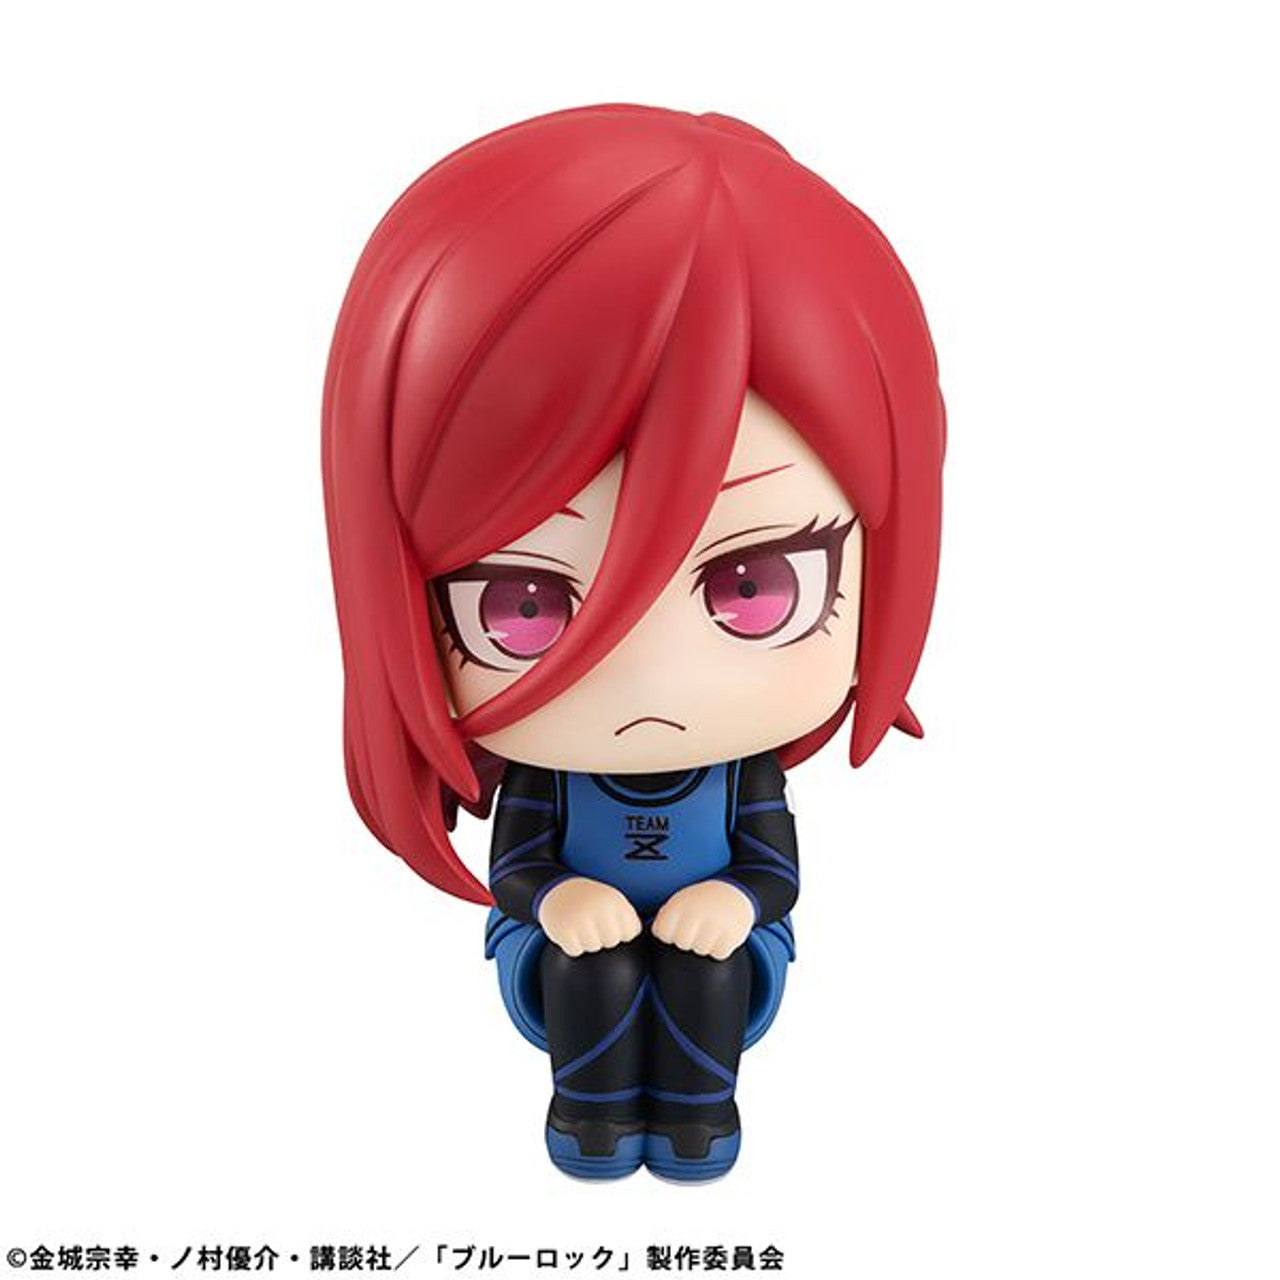 Blue Lock Look Up Series "Hyouma Chigiri"-MegaHouse-Ace Cards & Collectibles